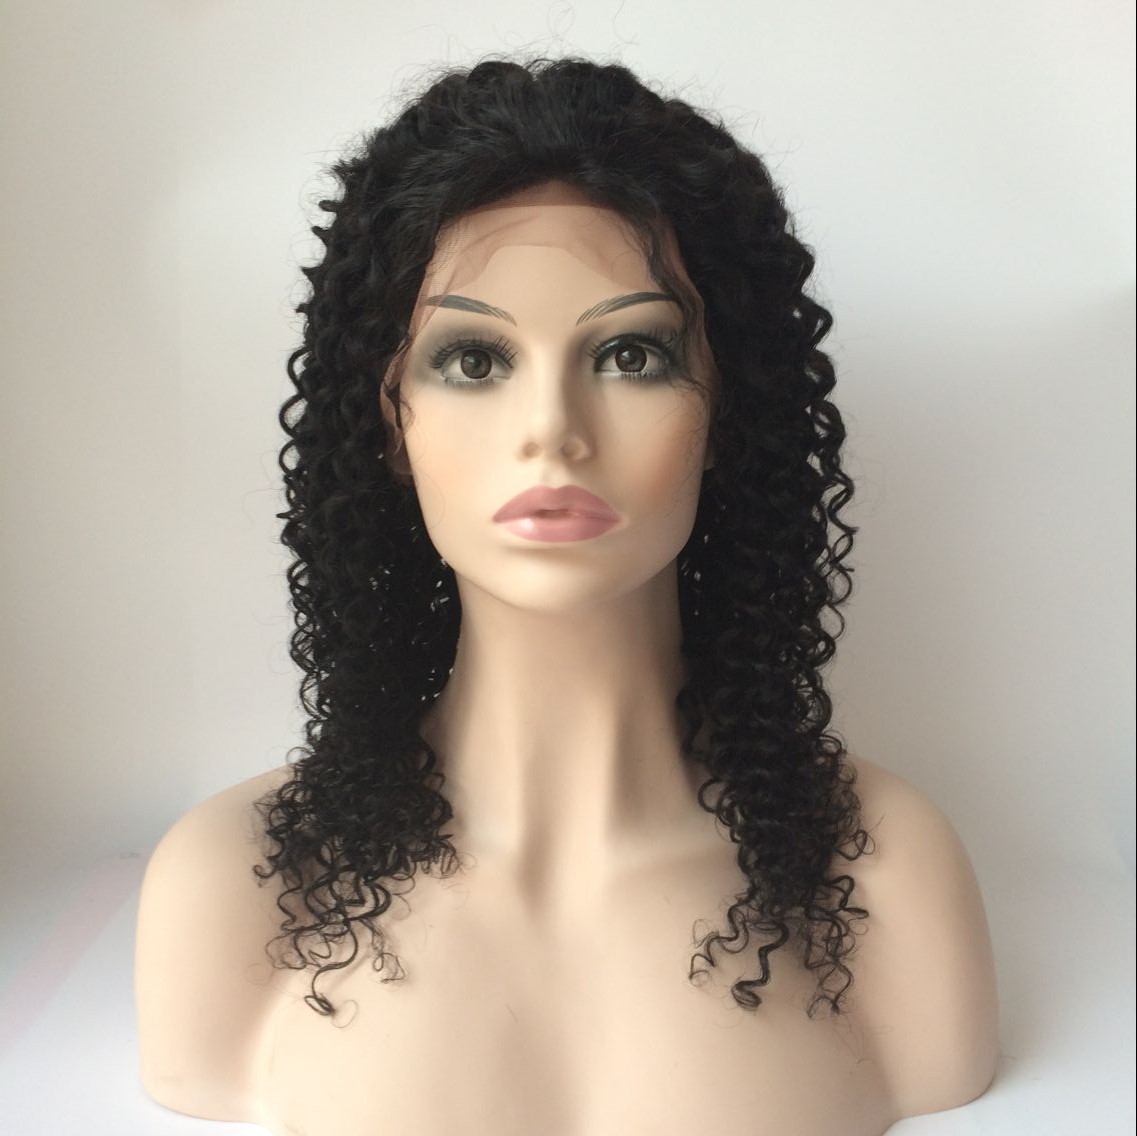 16inch Brazilian hair kinky curly lace front wig